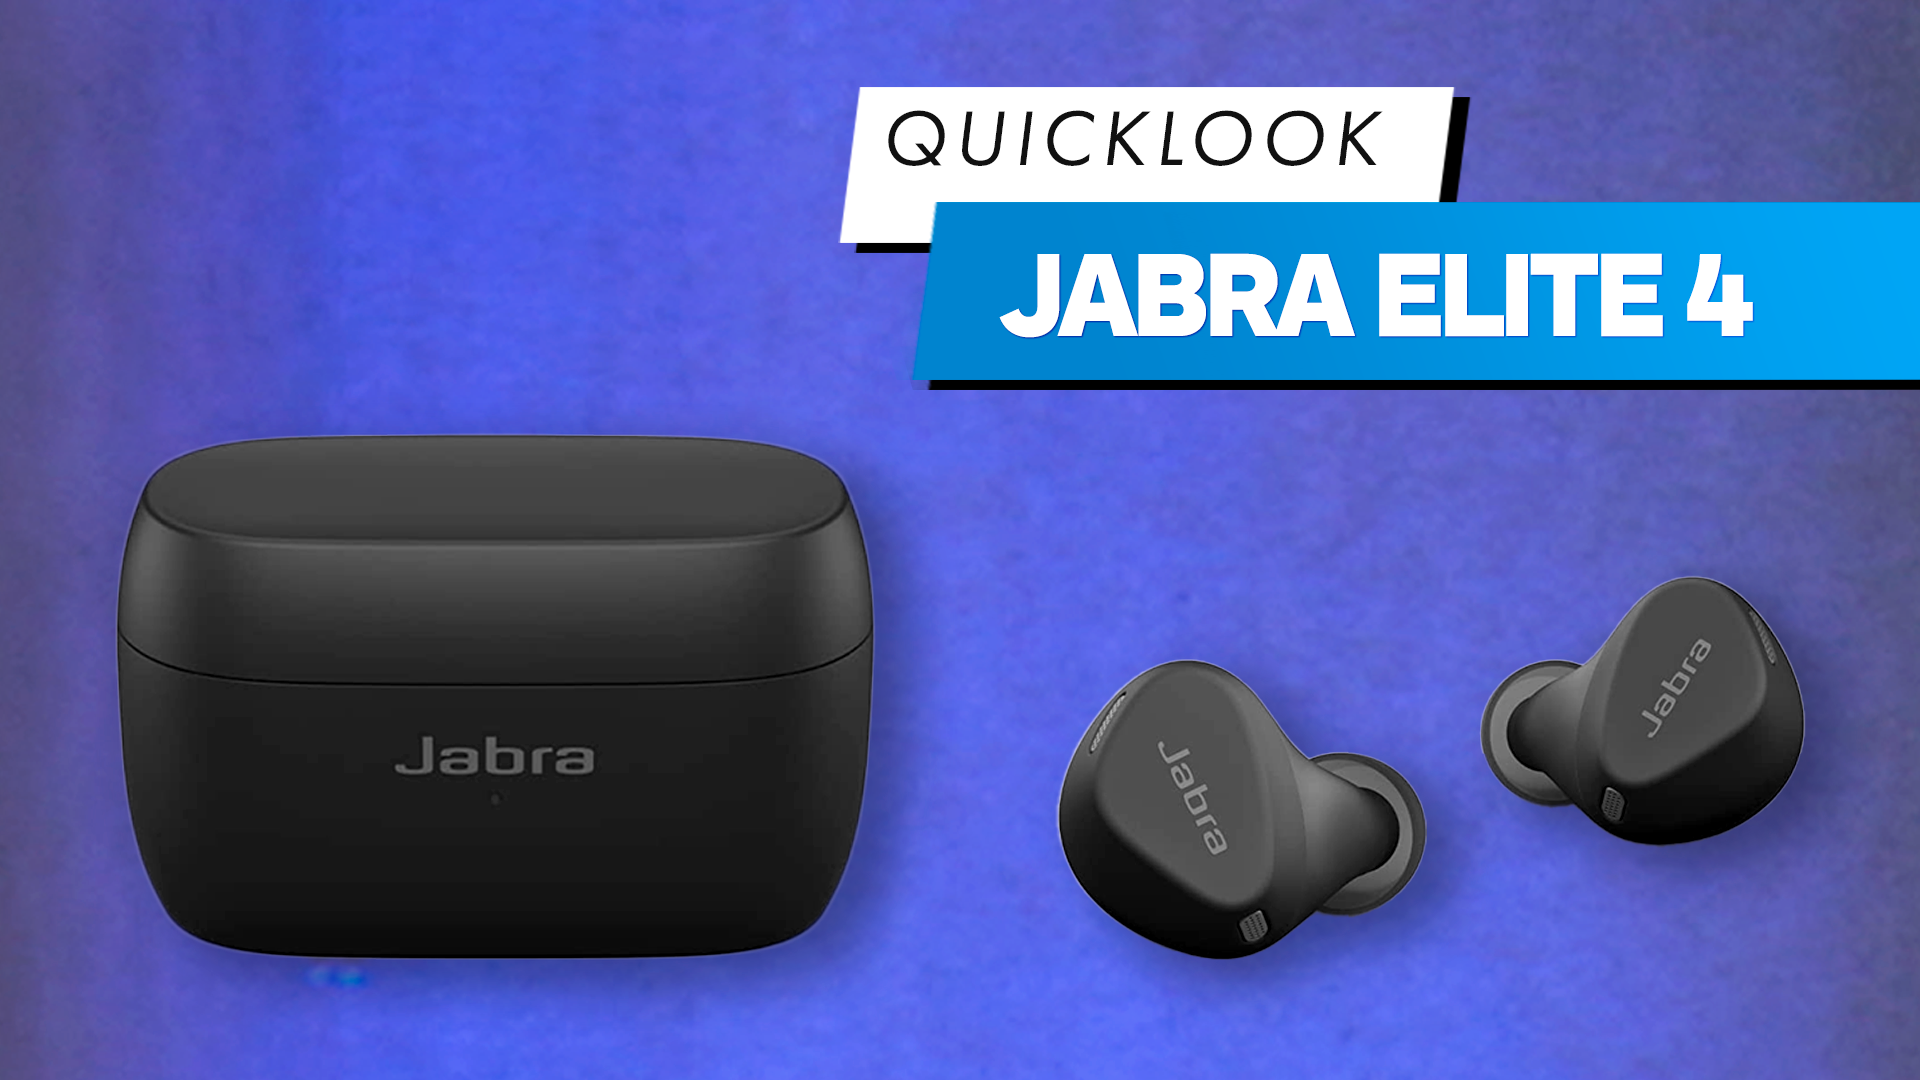 Jabra Elite 4 are designed for work and race